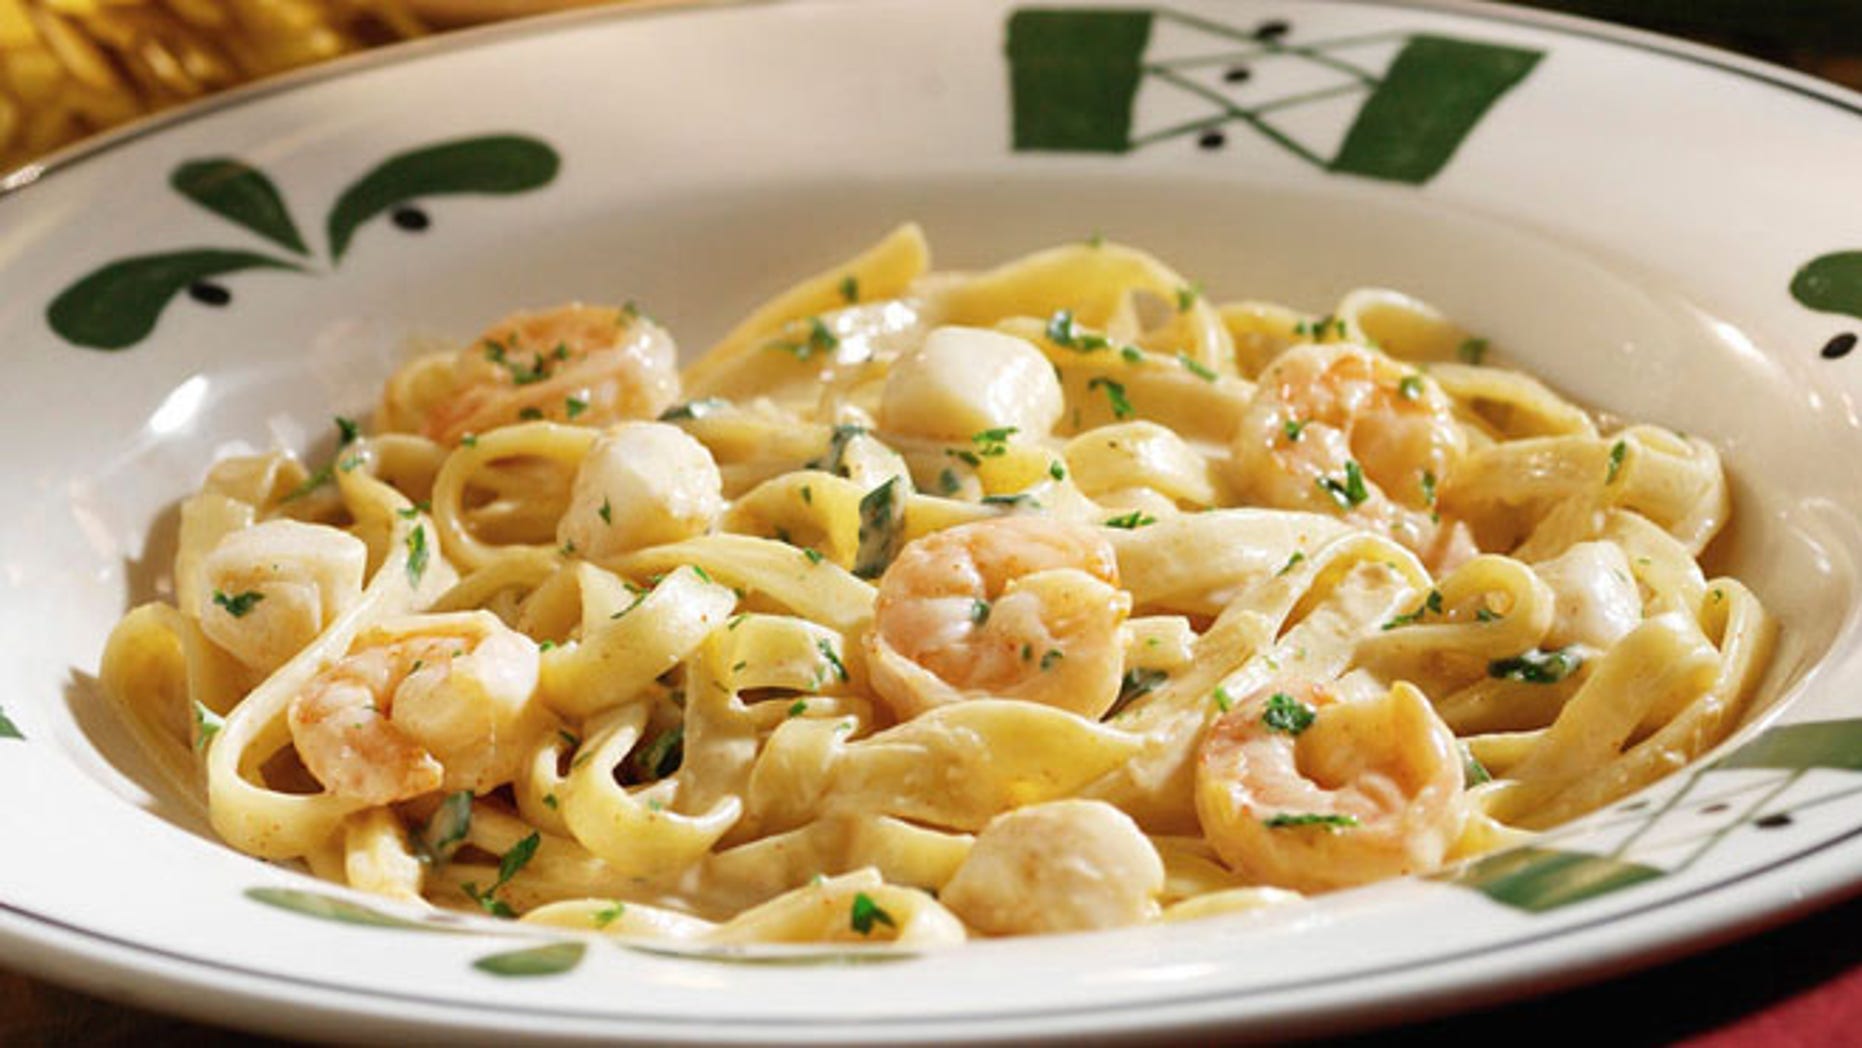 Olive Garden offering unlimited pasta for 7 weeks | Fox News